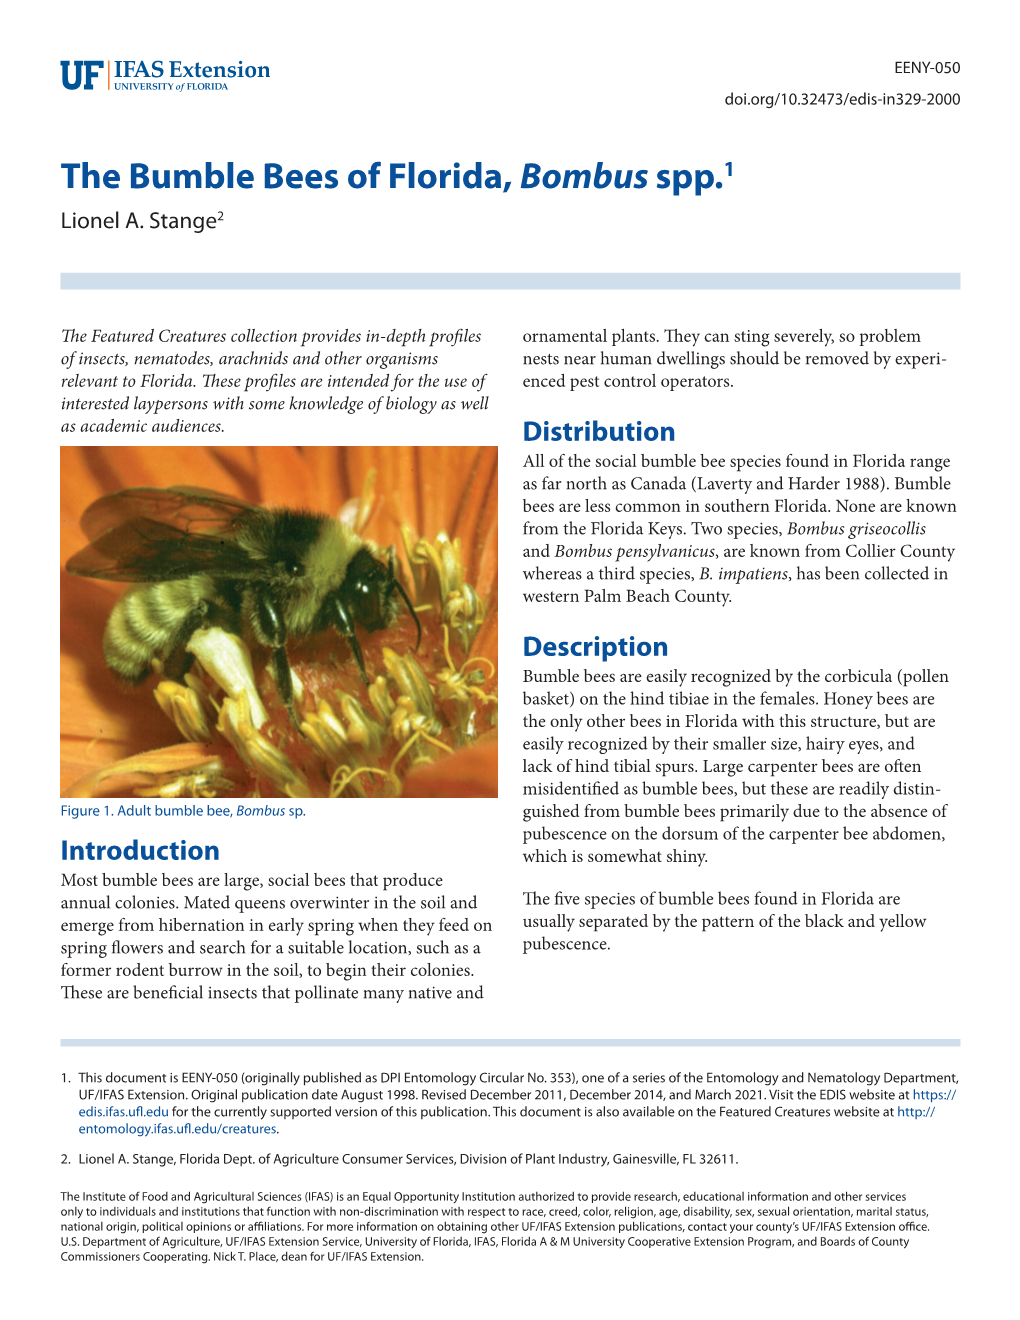 The Bumble Bees of Florida, Bombus Spp.1 Lionel A